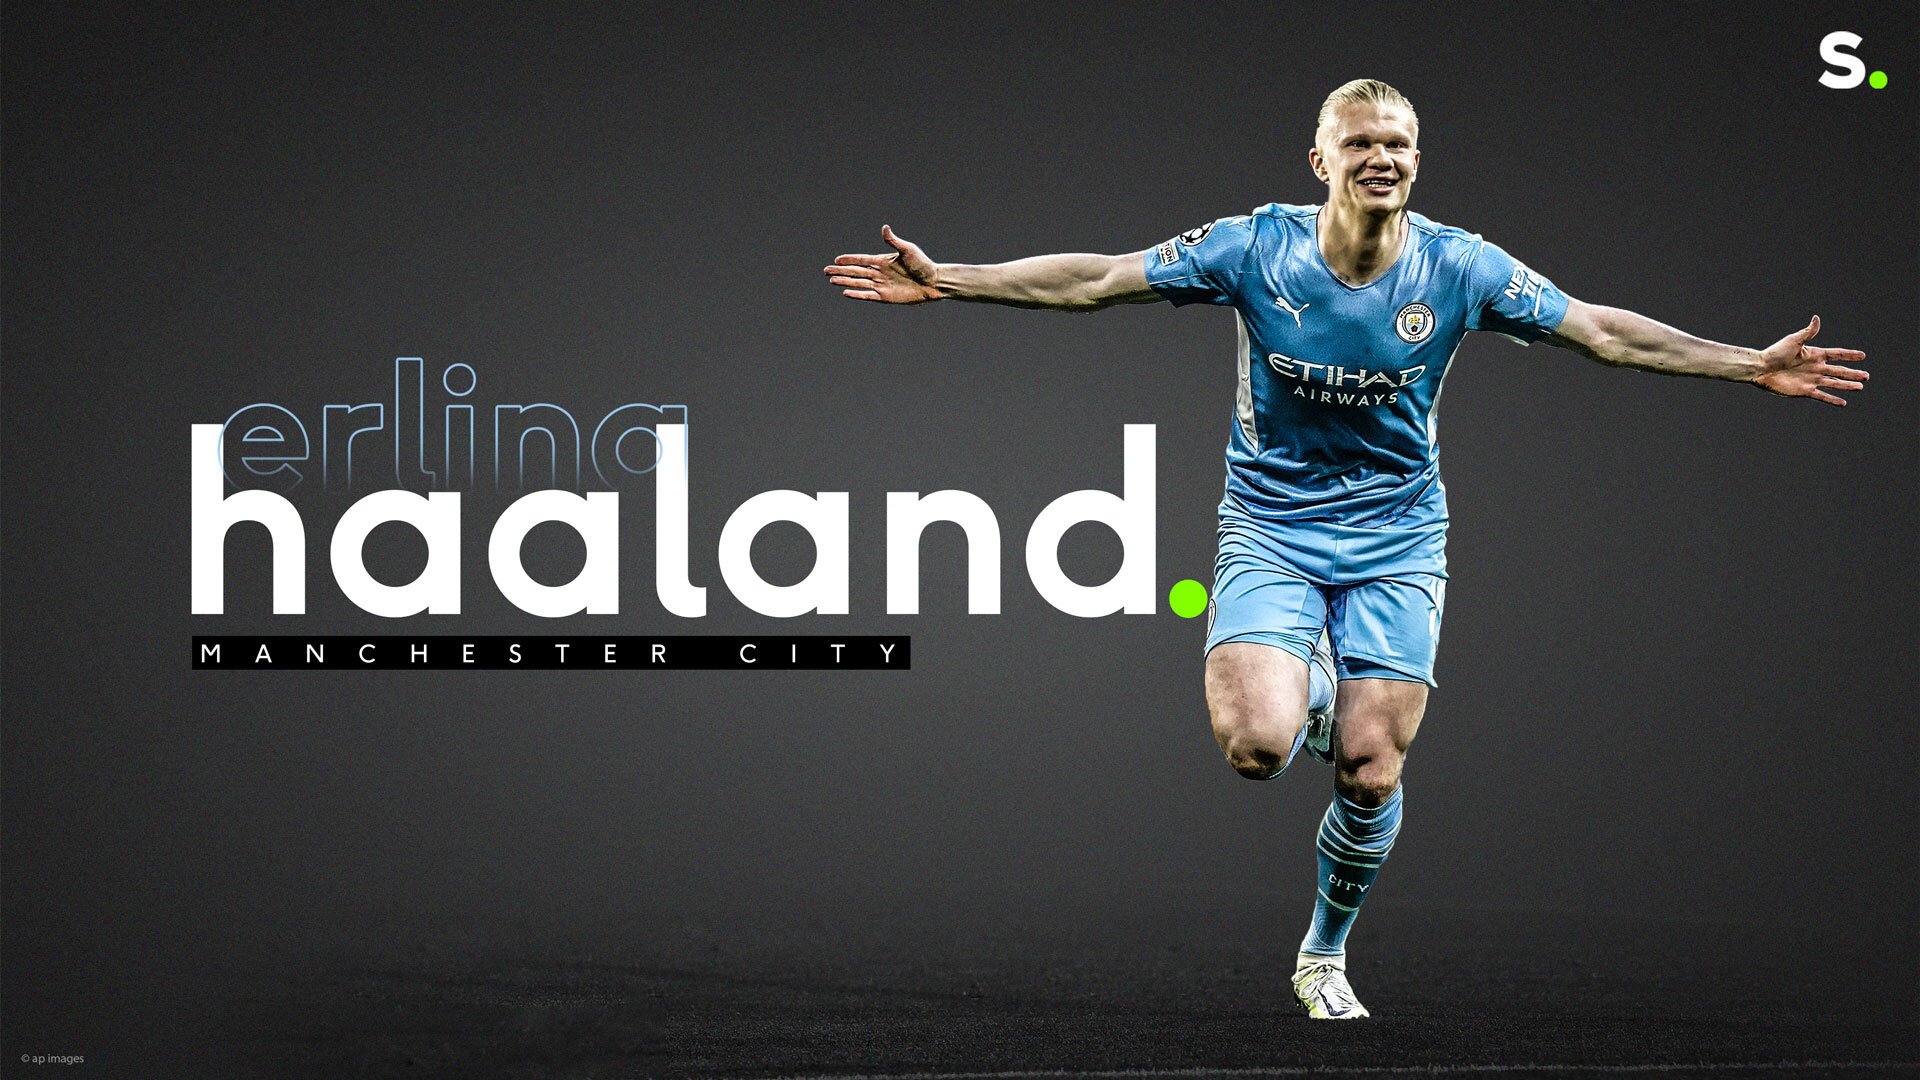 Mega transfer for Manchester City: English top club makes the arrival of Erling Haaland official